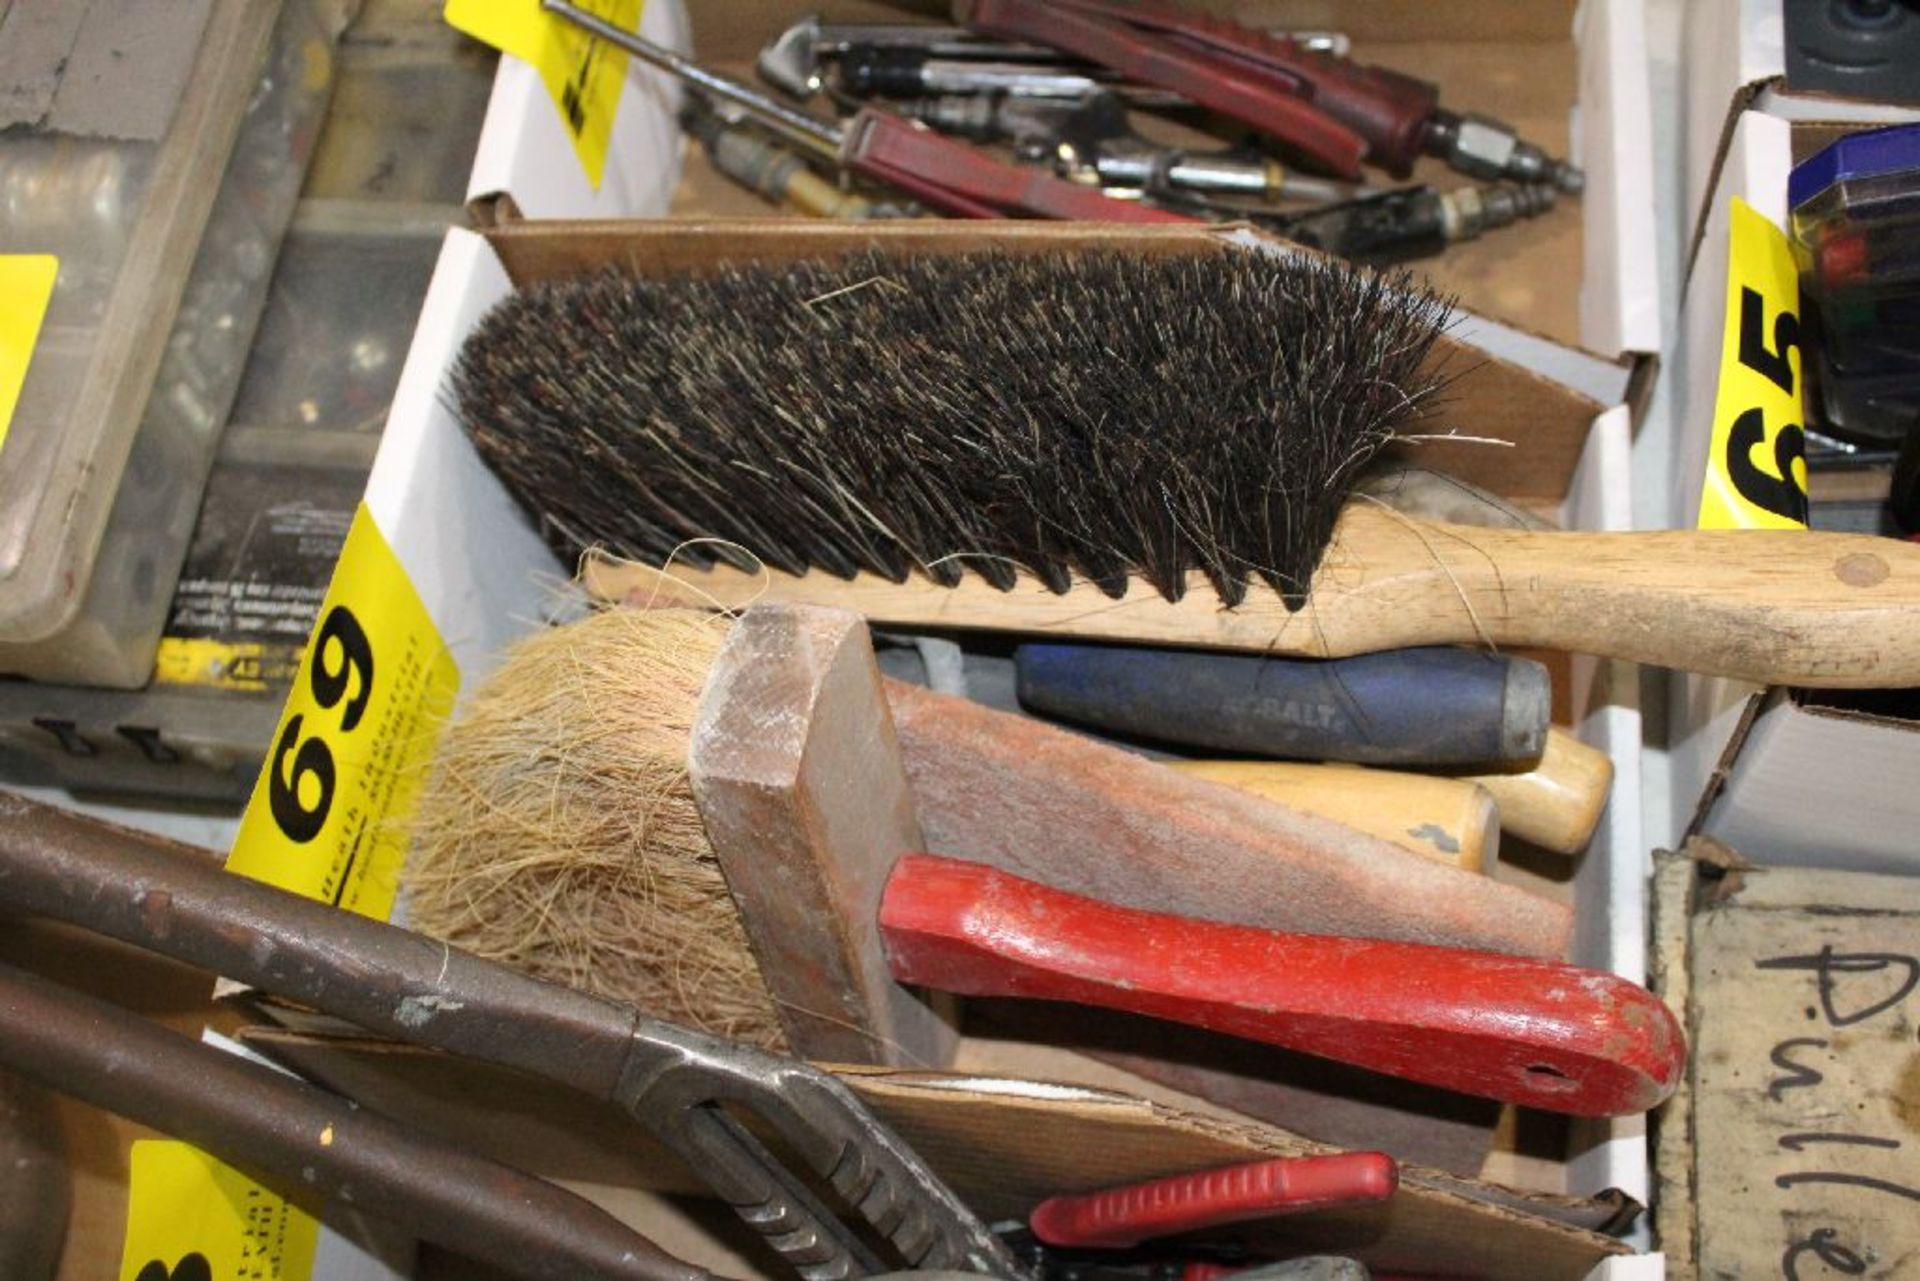 ASSORTED BRUSHES, SCRAPPERS AND TROWELS IN BOX